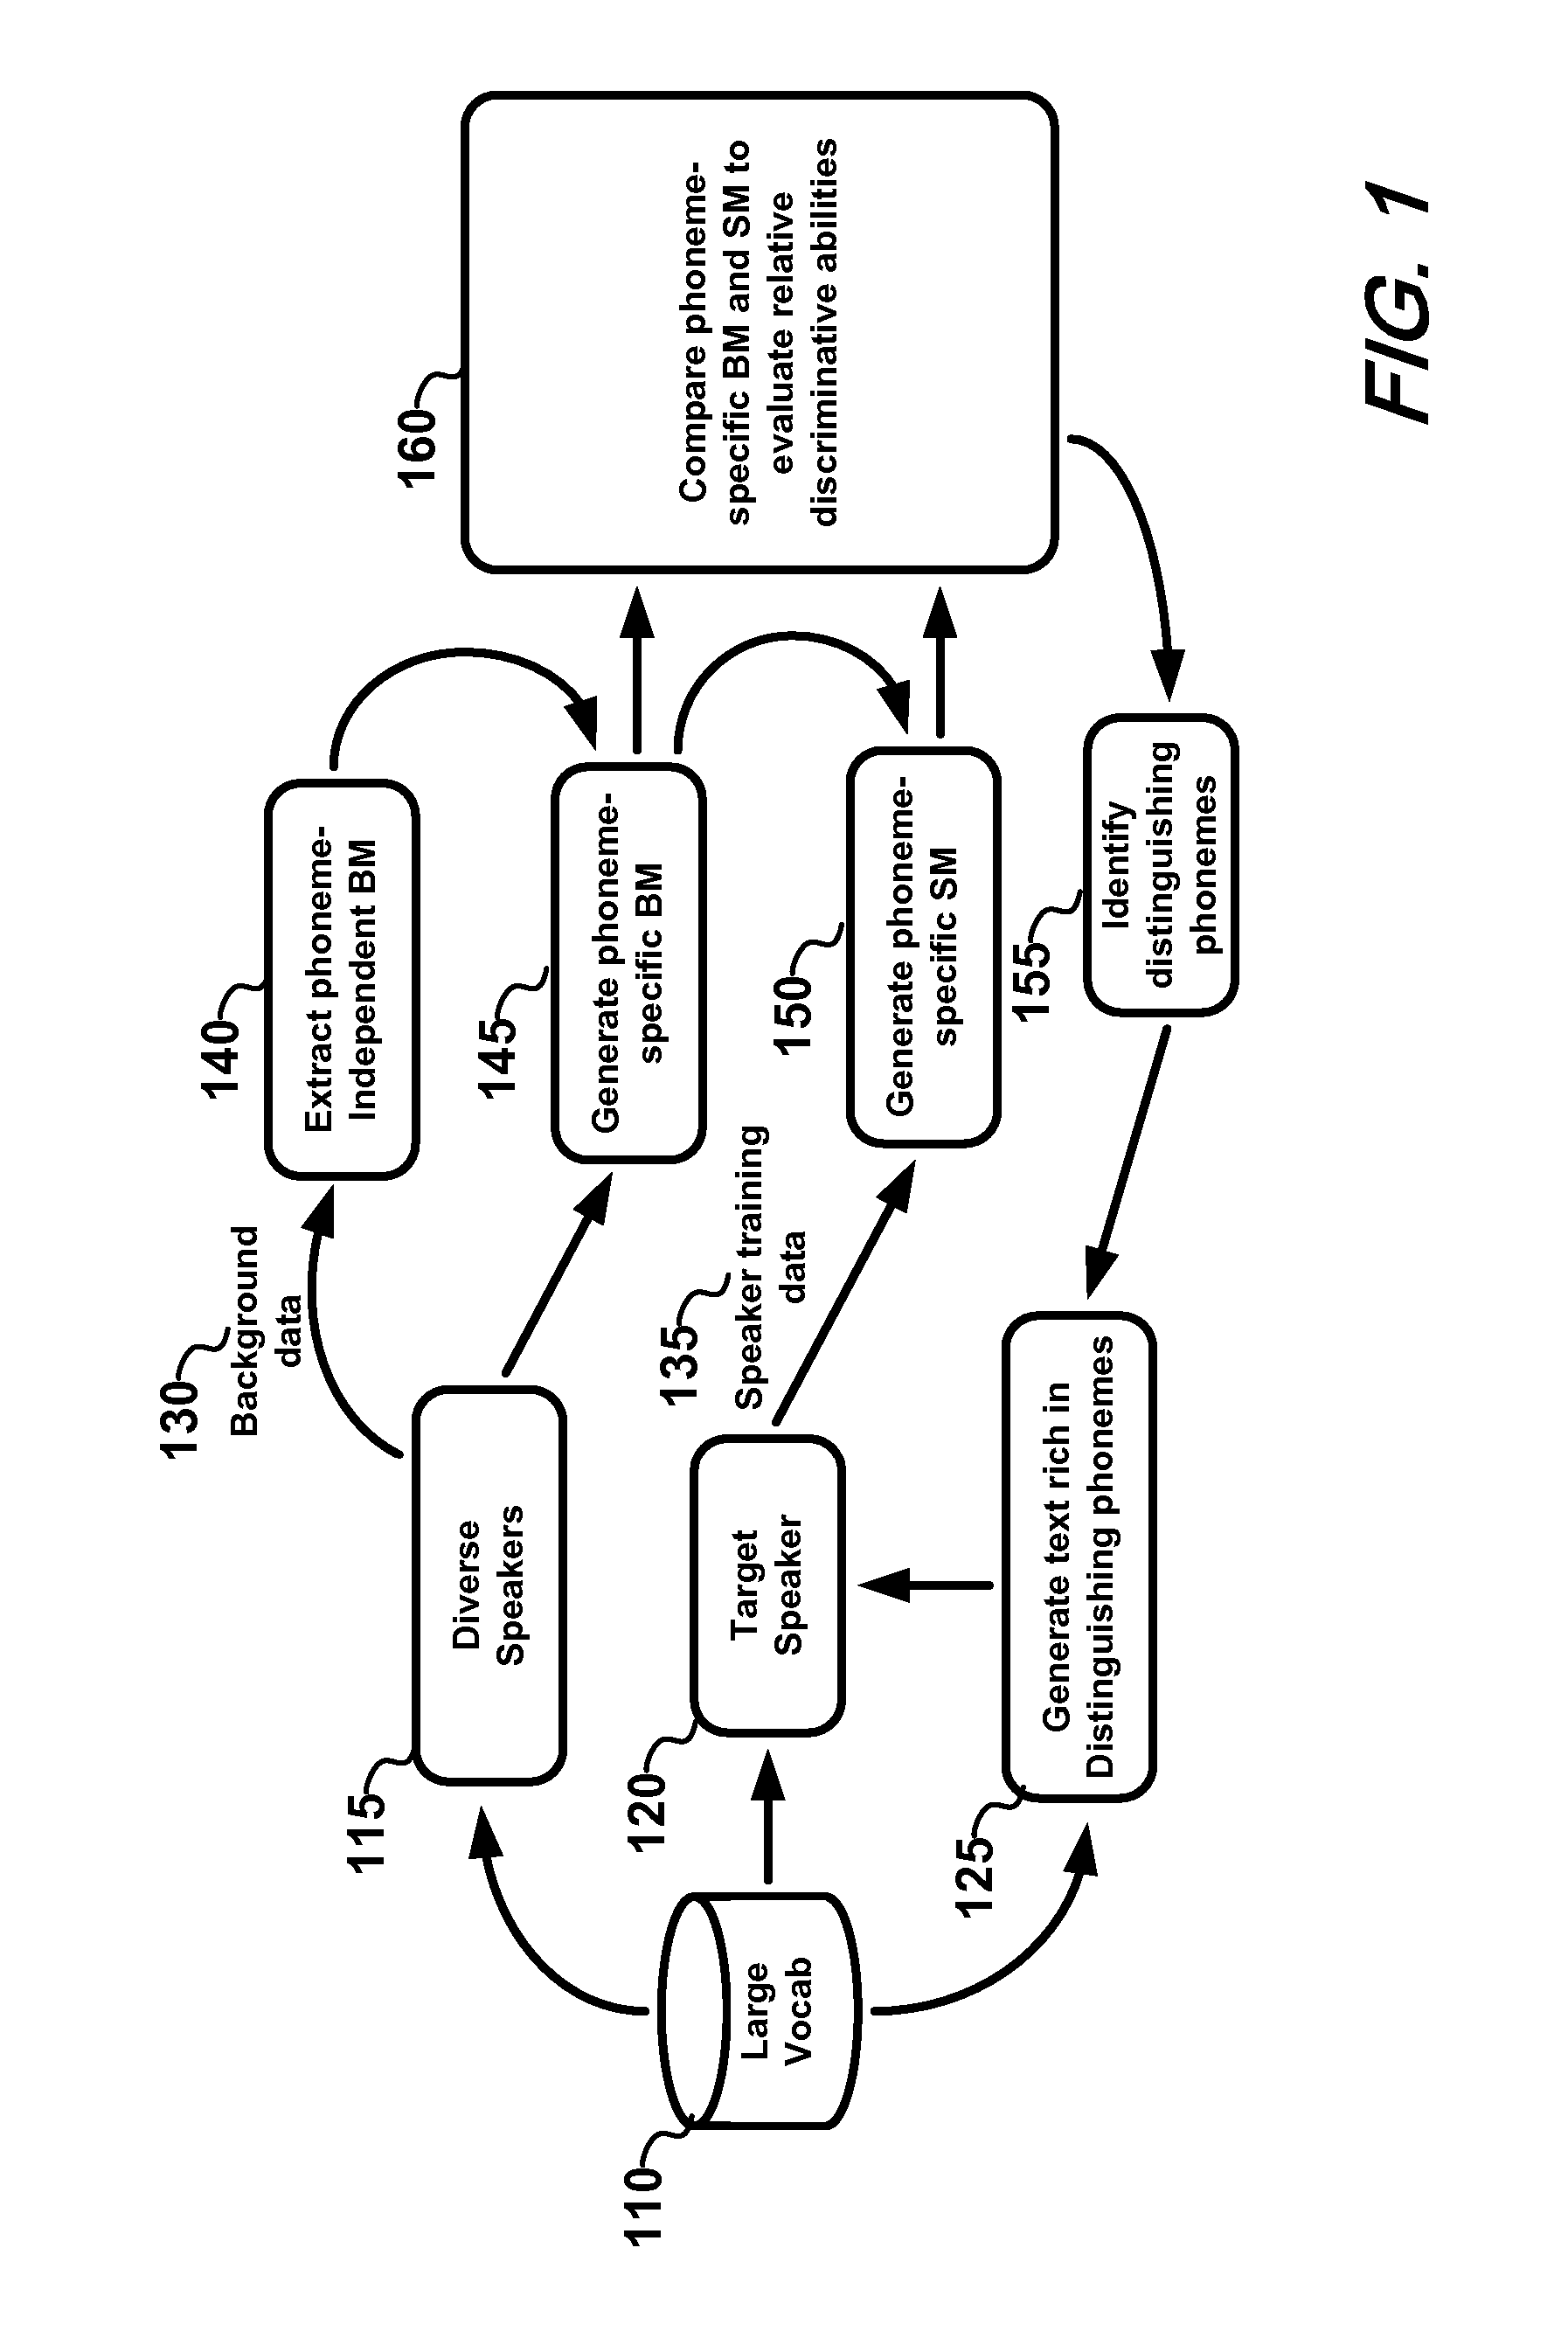 Voice-based multimodal speaker authentication using adaptive training and applications thereof